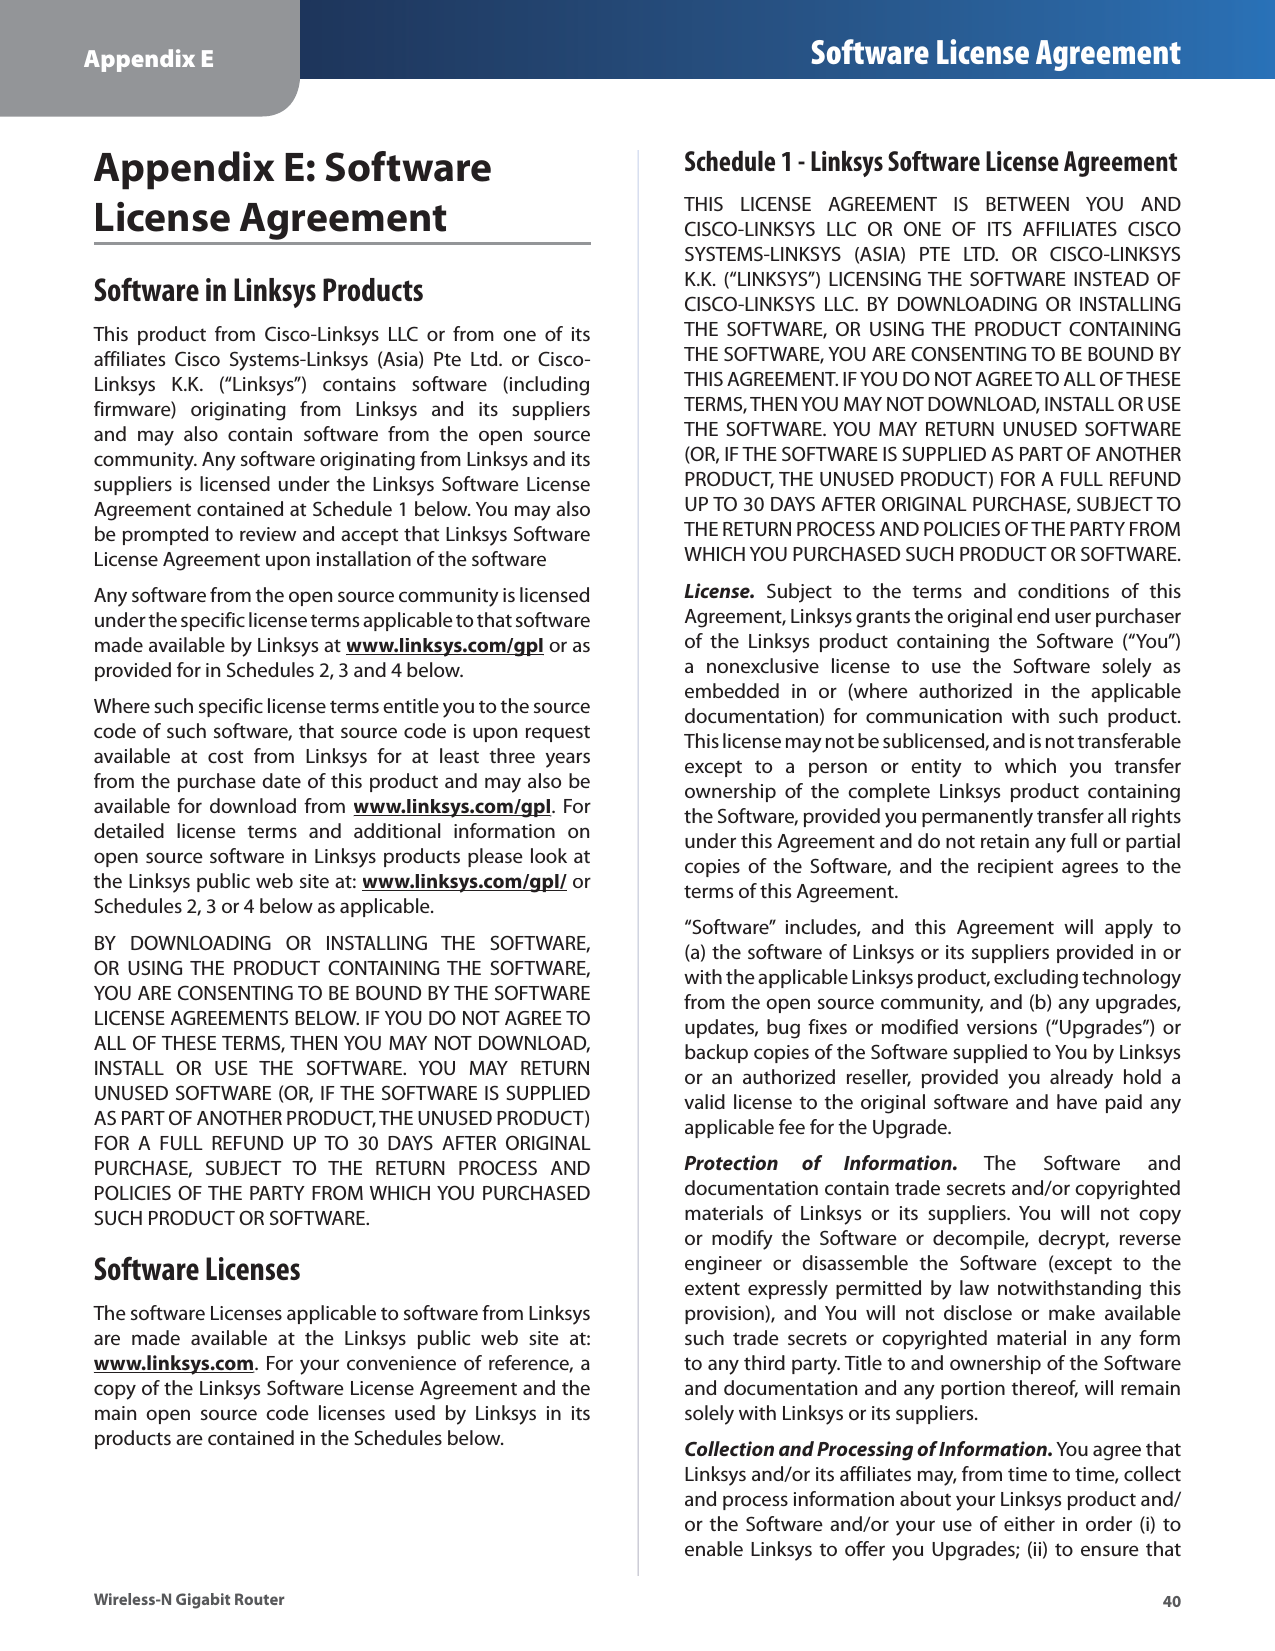 40Appendix E Software License AgreementWireless-N Gigabit RouterAppendix E: SoftwareLicense AgreementSoftware in Linksys ProductsThis product from Cisco-Linksys LLC or from one of itsaffiliates Cisco Systems-Linksys (Asia) Pte Ltd. or Cisco-Linksys K.K. (“Linksys”) contains software (includingfirmware) originating from Linksys and its suppliersand may also contain software from the open sourcecommunity. Any software originating from Linksys and itssuppliers is licensed under the Linksys Software LicenseAgreement contained at Schedule 1 below. You may alsobe prompted to review and accept that Linksys SoftwareLicense Agreement upon installation of the softwareAny software from the open source community is licensedunder the specific license terms applicable to that softwaremade available by Linksys atwww.linksys.com/gplygp or asprovided for in Schedules 2, 3 and 4 below.Where such specific license terms entitle you to the sourcecode of such software, that source code is upon requestavailable at cost from Linksys for at least three yearsfrom the purchase date of this product and may also beavailable for download fromwww.linksys.com/gplygp. Fordetailed license terms and additional information onopen source software in Linksys products please look atthe Linksys public web site at:www.linksys.com/gpl/ygporSchedules 2, 3 or 4 below as applicable.BY DOWNLOADING OR INSTALLING THE SOFTWARE,OR USING THE PRODUCT CONTAINING THE SOFTWARE,YOU ARE CONSENTING TO BE BOUND BY THE SOFTWARELICENSE AGREEMENTS BELOW. IF YOU DO NOT AGREE TOALL OF THESE TERMS, THEN YOU MAY NOT DOWNLOAD,INSTALL OR USE THE SOFTWARE. YOU MAY RETURNUNUSED SOFTWARE (OR, IF THE SOFTWARE IS SUPPLIEDAS PART OF ANOTHER PRODUCT, THE UNUSED PRODUCT)FOR A FULL REFUND UP TO 30 DAYS AFTER ORIGINALPURCHASE, SUBJECT TO THE RETURN PROCESS ANDPOLICIES OF THE PARTY FROM WHICH YOU PURCHASEDSUCH PRODUCT OR SOFTWARE.Software LicensesThe software Licenses applicable to software from Linksysare made available at the Linksys public web site at:www.linksys.comy. For your convenience of reference, acopy of the Linksys Software License Agreement and themain open source code licenses used by Linksys in itsproducts are contained in the Schedules below.Schedule 1 - Linksys Software License AgreementTHIS LICENSE AGREEMENT IS BETWEEN YOU ANDCISCO-LINKSYS LLC OR ONE OF ITS AFFILIATES CISCOSYSTEMS-LINKSYS (ASIA) PTE LTD. OR CISCO-LINKSYSK.K. (“LINKSYS”) LICENSING THE SOFTWARE INSTEAD OFCISCO-LINKSYS LLC. BY DOWNLOADING OR INSTALLINGTHE SOFTWARE, OR USING THE PRODUCT CONTAININGTHE SOFTWARE, YOU ARE CONSENTING TO BE BOUND BYTHIS AGREEMENT. IF YOU DO NOT AGREE TO ALL OF THESETERMS, THEN YOU MAY NOT DOWNLOAD, INSTALL OR USETHE SOFTWARE. YOU MAY RETURN UNUSED SOFTWARE(OR, IF THE SOFTWARE IS SUPPLIED AS PART OF ANOTHERPRODUCT, THE UNUSED PRODUCT) FOR A FULL REFUNDUP TO 30 DAYS AFTER ORIGINAL PURCHASE, SUBJECT TOTHE RETURN PROCESS AND POLICIES OF THE PARTY FROMWHICH YOU PURCHASED SUCH PRODUCT OR SOFTWARE.License.Subject to the terms and conditions of thisAgreement, Linksys grants the original end user purchaserof the Linksys product containing the Software (“You”)a nonexclusive license to use the Software solely asembedded in or (where authorized in the applicabledocumentation) for communication with such product.This license may not be sublicensed, and is not transferableexcept to a person or entity to which you transferownership of the complete Linksys product containingthe Software, provided you permanently transfer all rightsunder this Agreement and do not retain any full or partialcopies of the Software, and the recipient agrees to theterms of this Agreement.“Software” includes, and this Agreement will apply to(a)the software of Linksys or its suppliers provided in orwith the applicable Linksys product, excluding technologyfrom the open source community, and (b) any upgrades,updates, bug fixes or modified versions (“Upgrades”) orbackup copies of the Software supplied to You by Linksysor an authorized reseller, provided you already hold avalid license to the original software and have paid anyapplicable fee for the Upgrade.Protection of Information. The Software anddocumentation contain trade secrets and/or copyrightedmaterials of Linksys or its suppliers. You will not copyor modify the Software or decompile, decrypt, reverseengineer or disassemble the Software (except to theextent expressly permitted by law notwithstanding thisprovision), and You will not disclose or make availablesuch trade secrets or copyrighted material in any formto any third party. Title to and ownership of the Softwareand documentation and any portion thereof, will remainsolely with Linksys or its suppliers.Collection and Processing of Information. You agree thatLinksys and/or its affiliates may, from time to time, collectand process information about your Linksys product and/or the Software and/or your use of either in order (i) toenable Linksys to offer you Upgrades; (ii) to ensure that